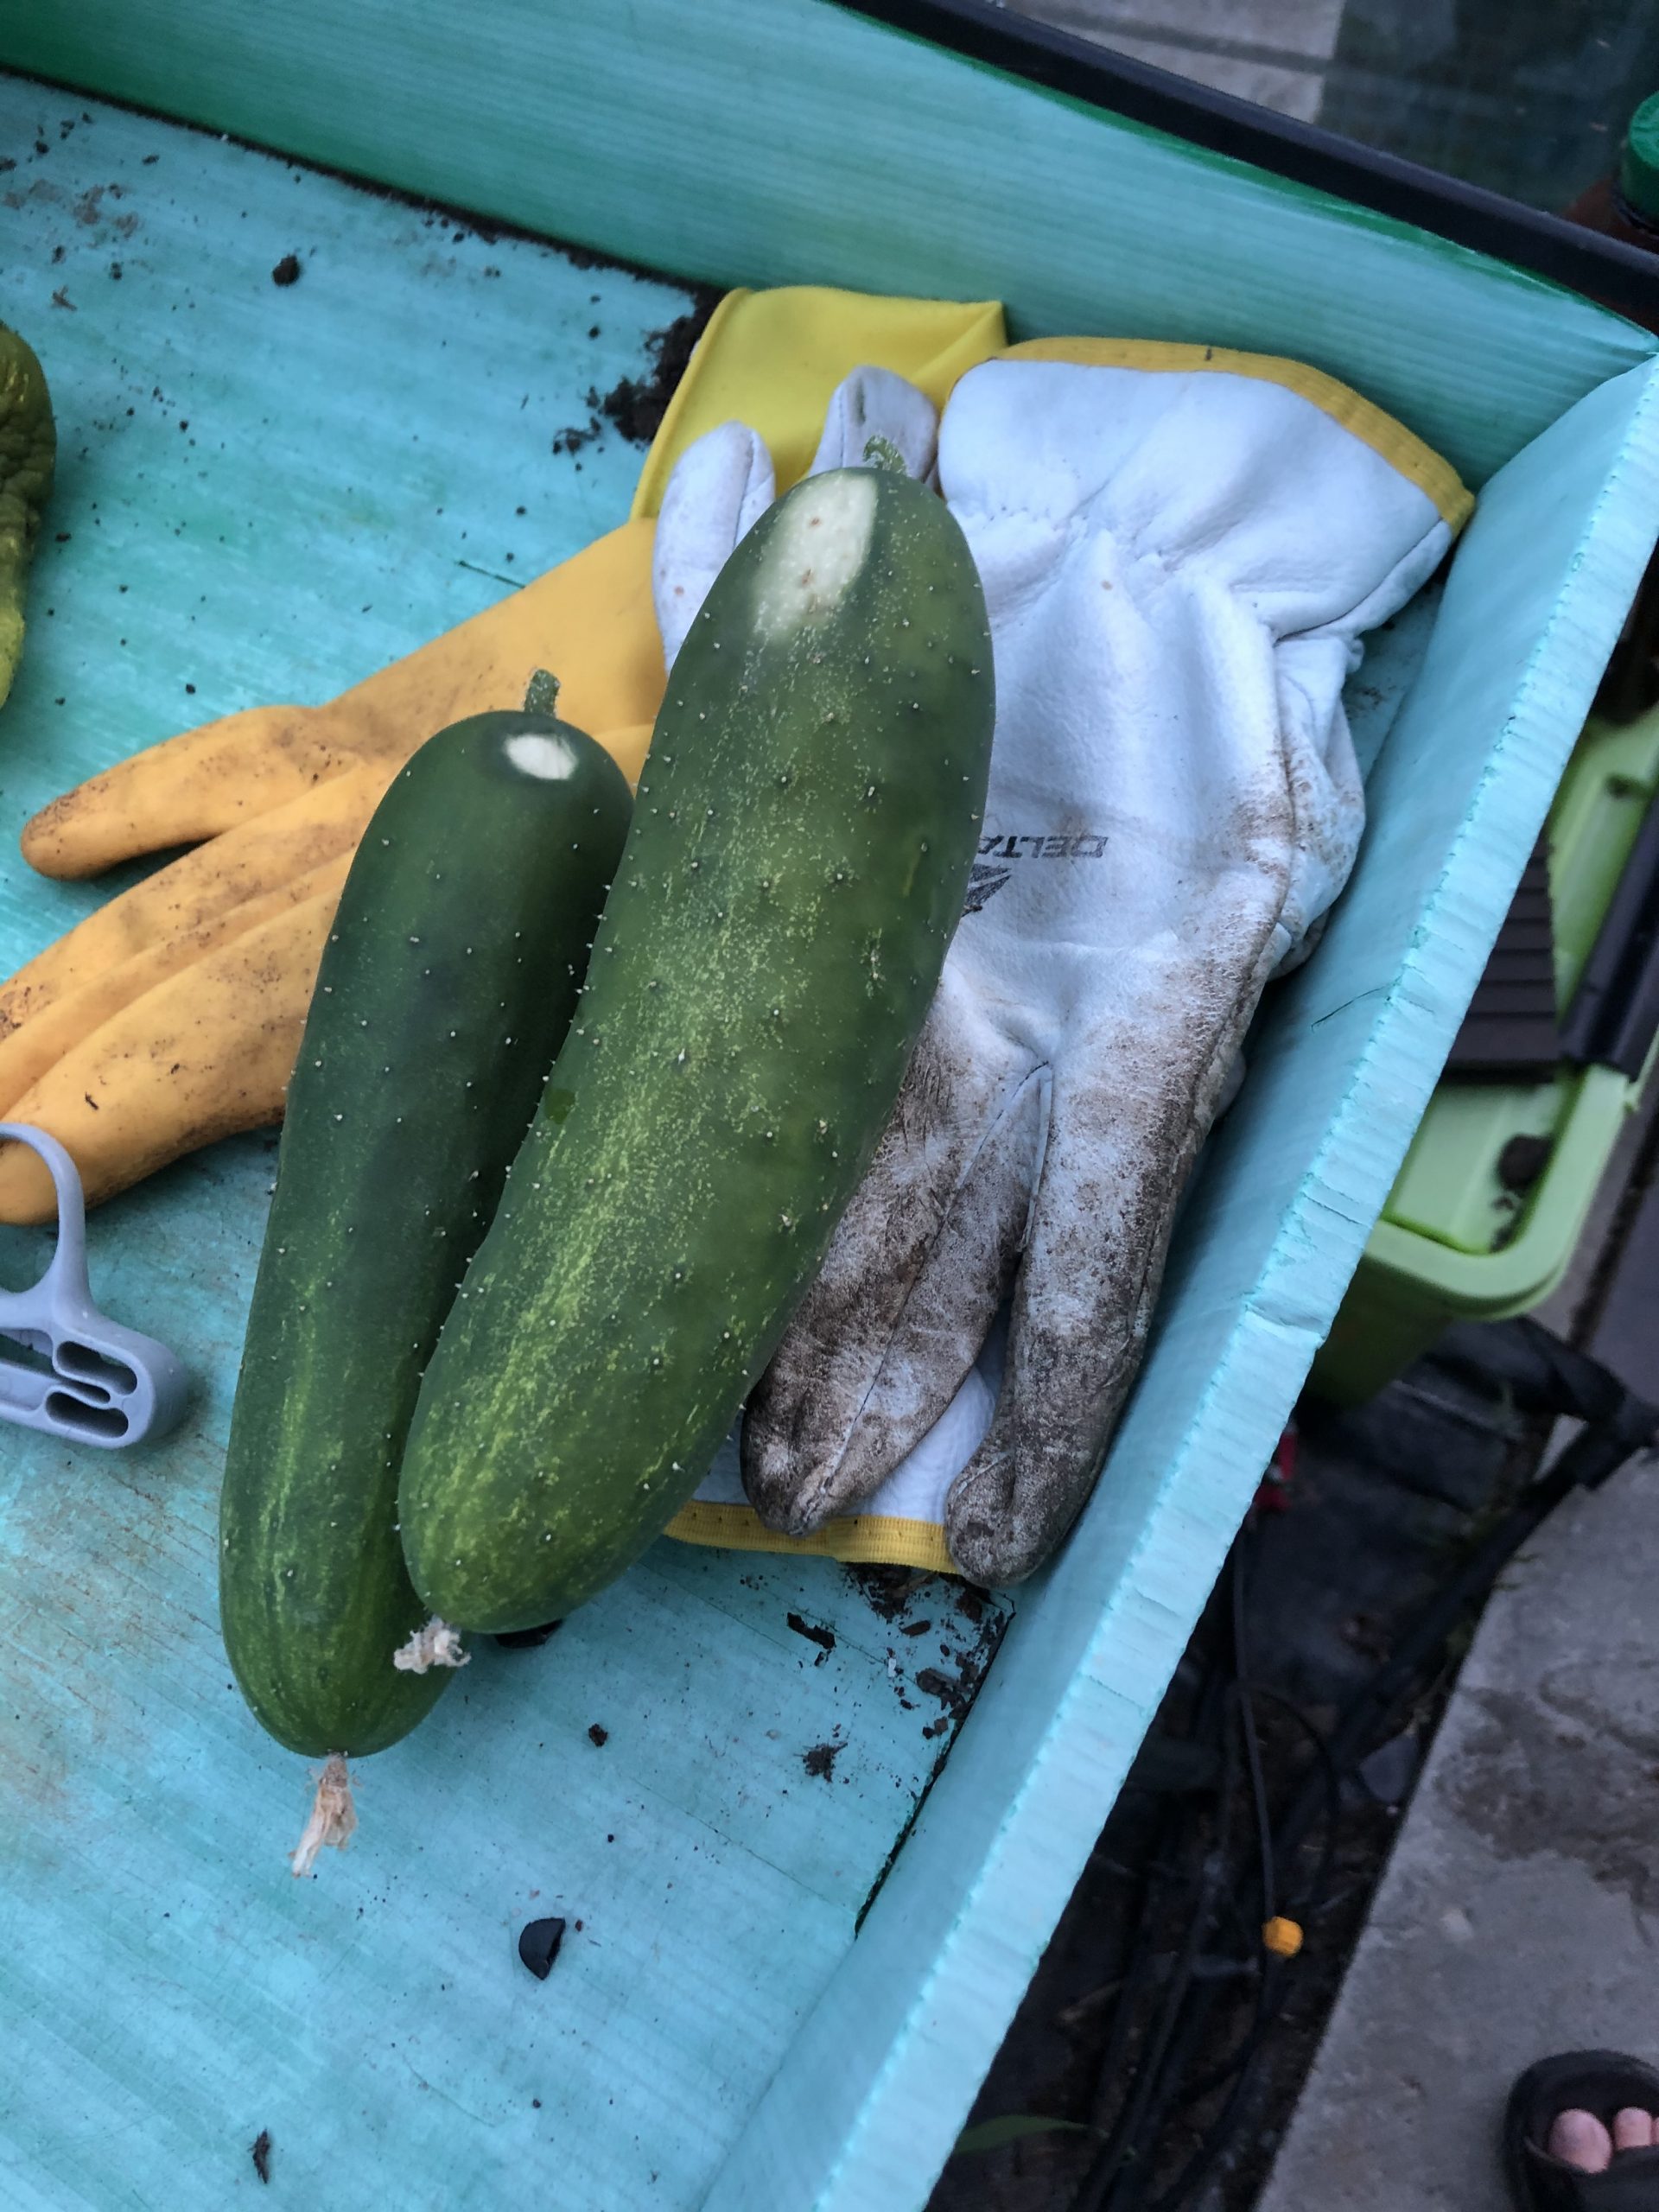 ridge cucumber fruit with white patches 25/6/20